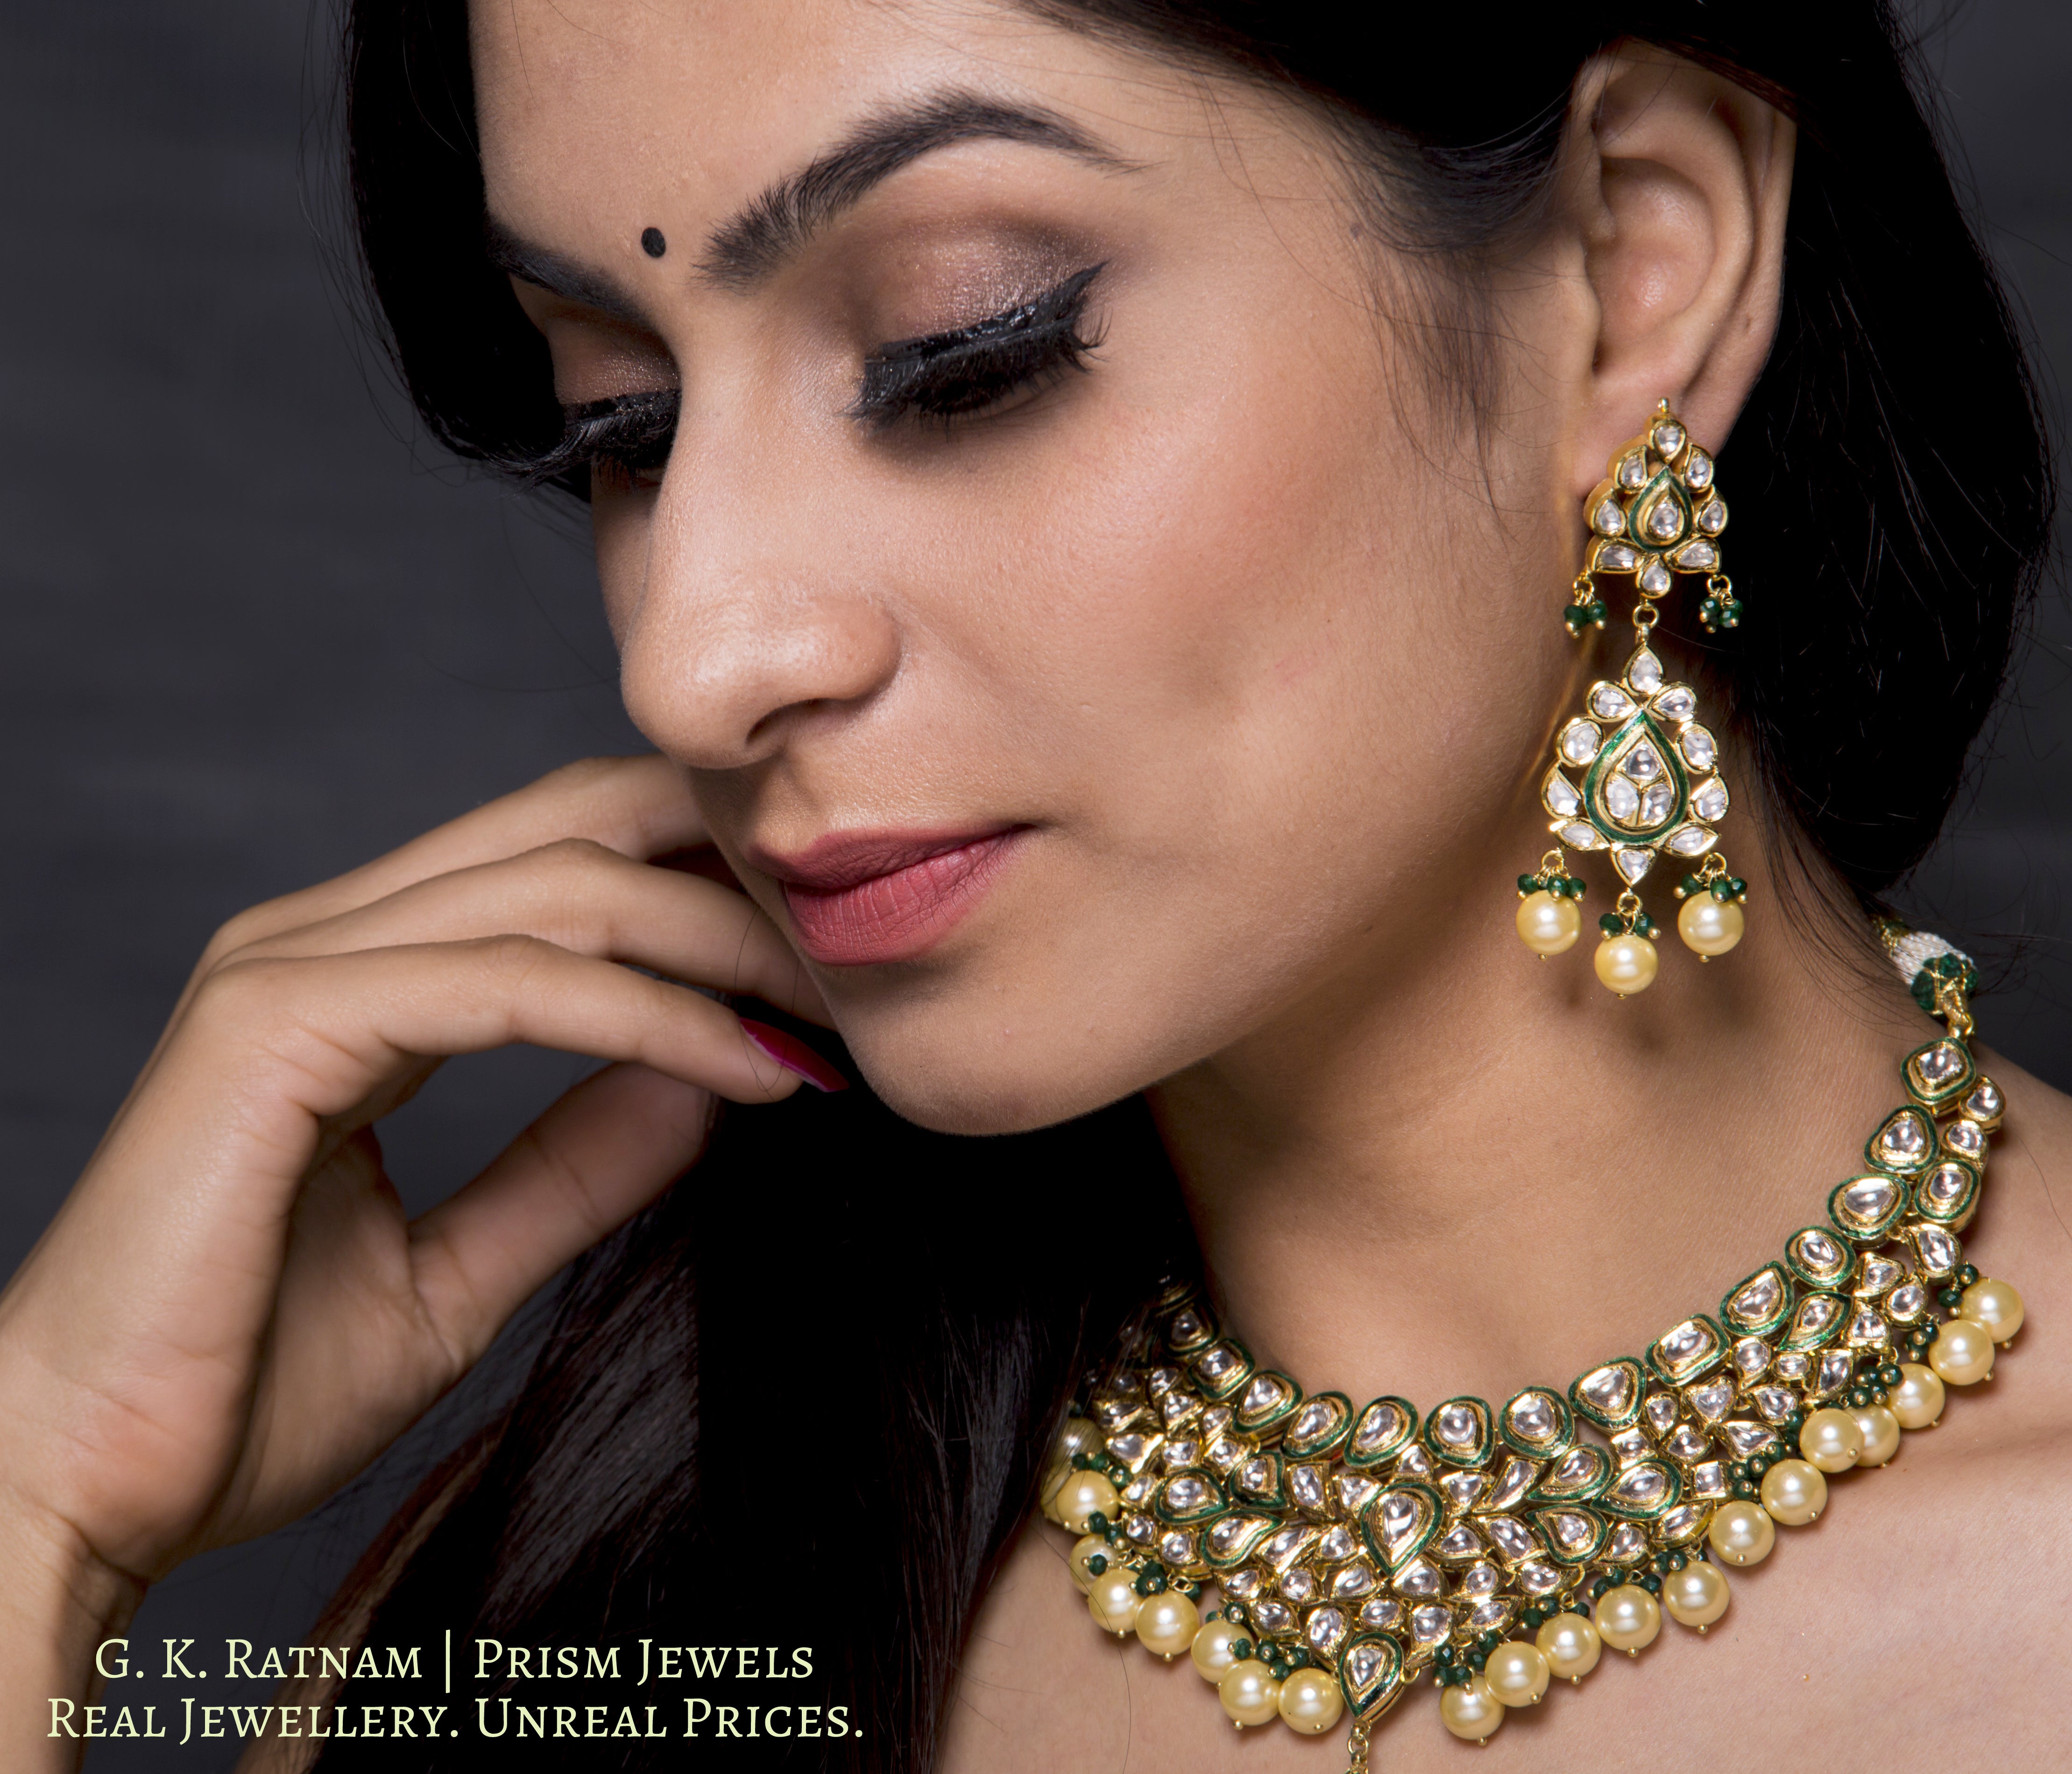 Traditional Gold and Diamond Polki green enamel Necklace Set with lustrous pearls and a dash of green - G. K. Ratnam